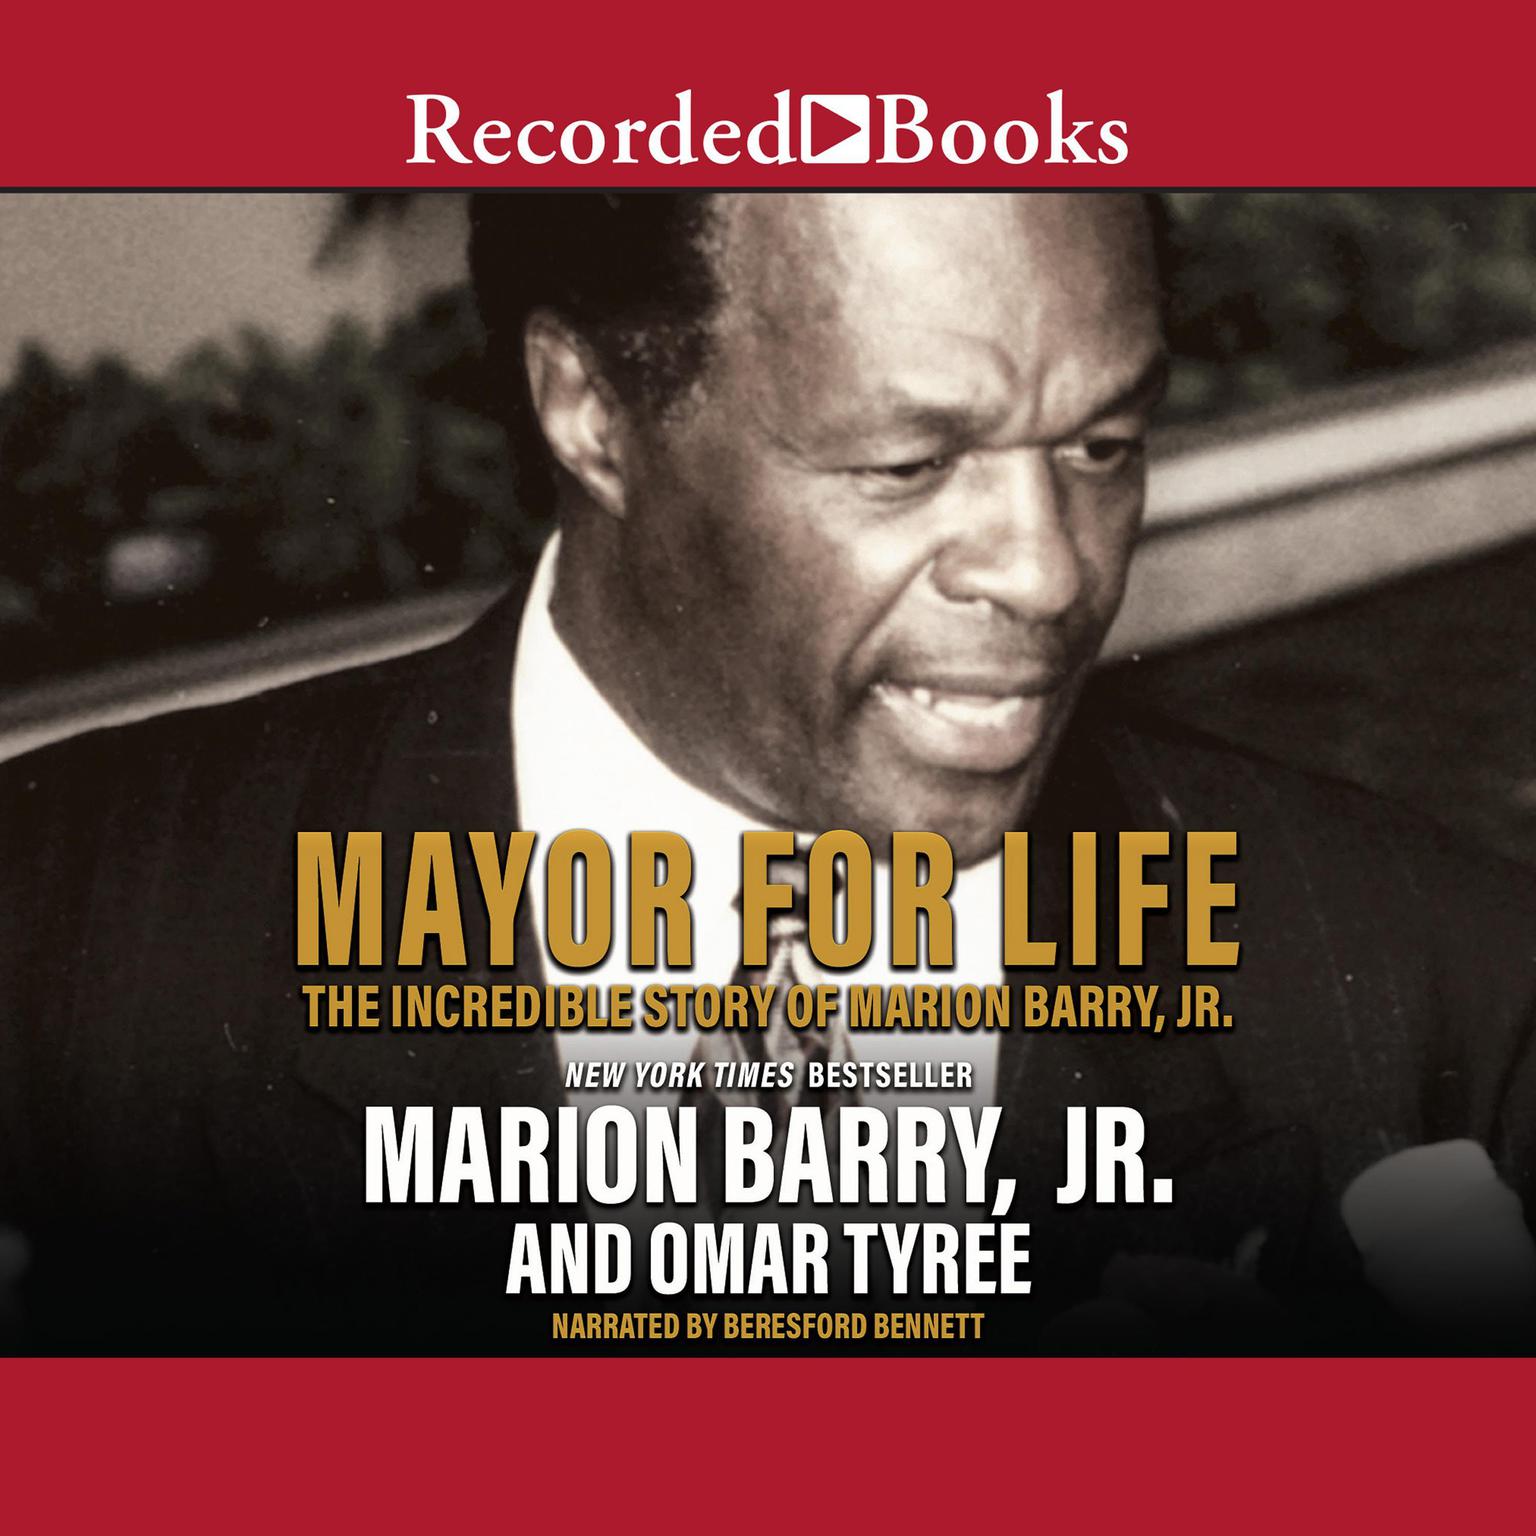 Mayor for Life: The Incredible Story of Marion Barry, Jr. Audiobook, by Marion Barry